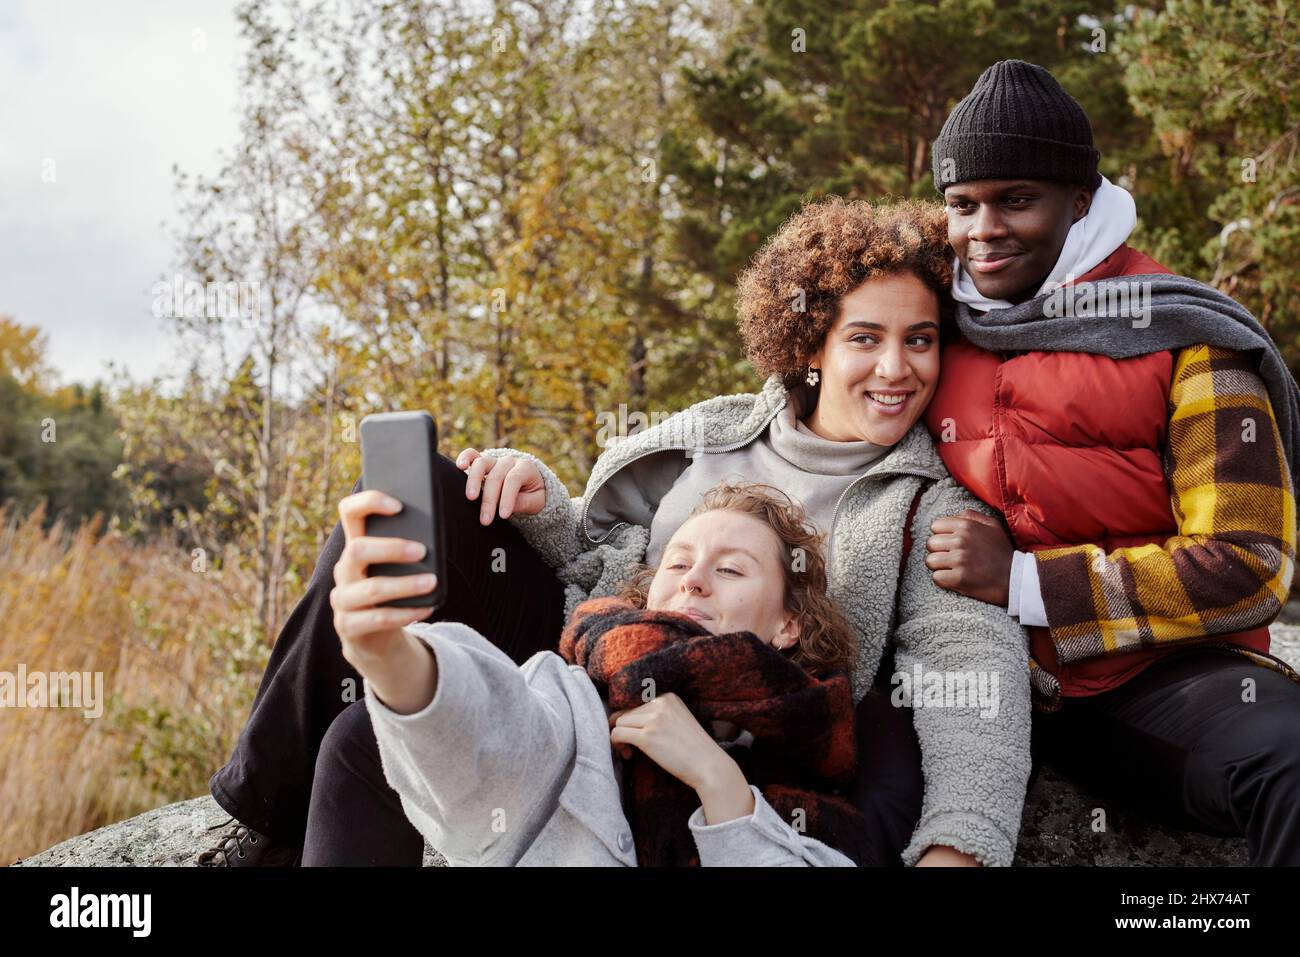 Group of friends taking selfie in nature Stock Photo